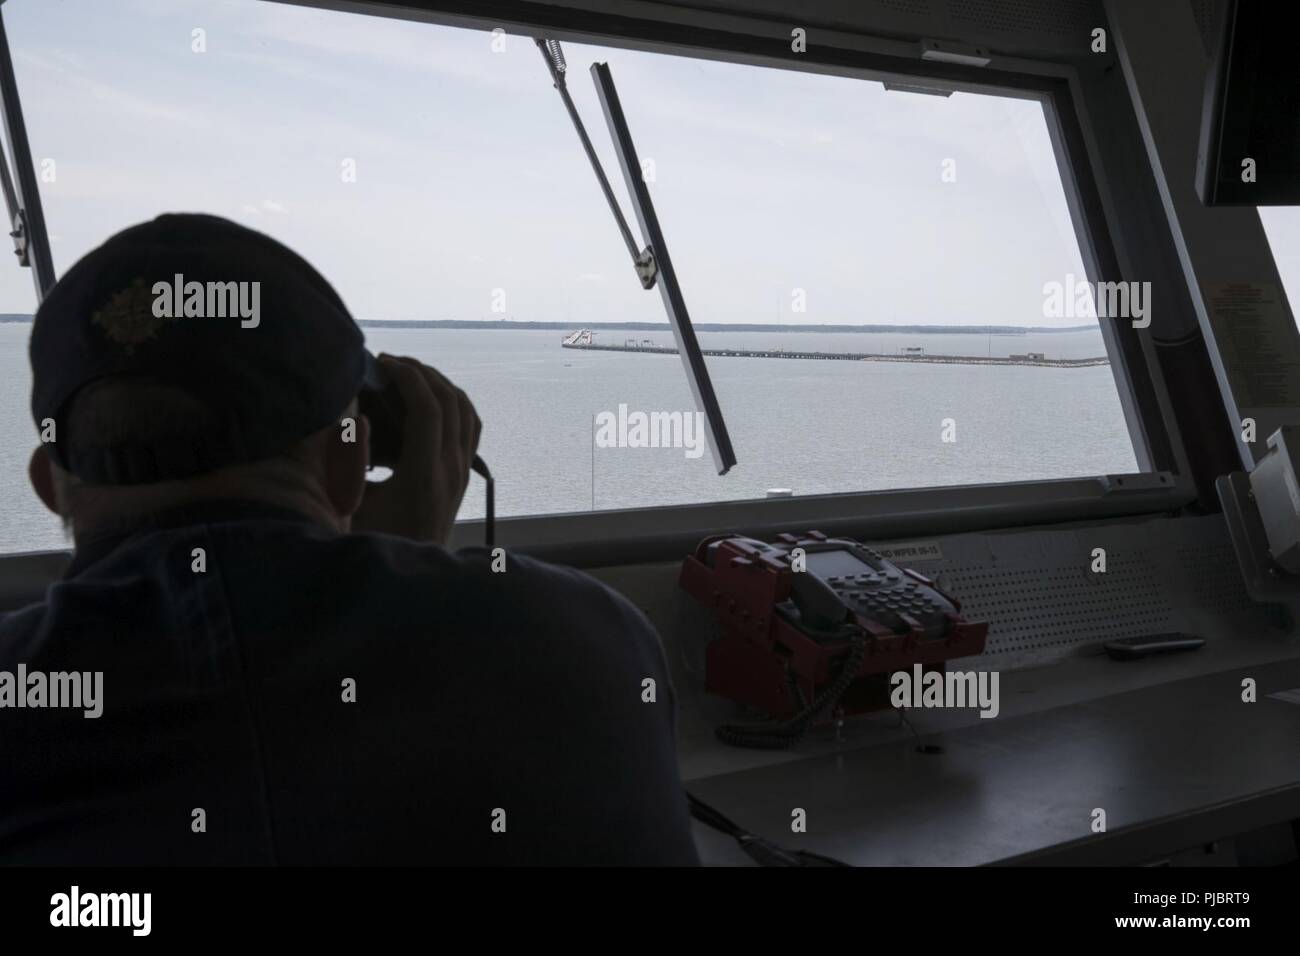 NORFOLK, Va. (July 15, 2018) A Sailor assigned to USS Gerald R. Ford (CVN 78) stands watch on the ship’s bridge as Ford passes the Monitor-Merrimack Bridge Tunnel during sea and anchor detail. Ford departed Norfolk today to begin its Post Shakedown Availability at Huntington Ingalls Newport News Shipbuilding. Stock Photo